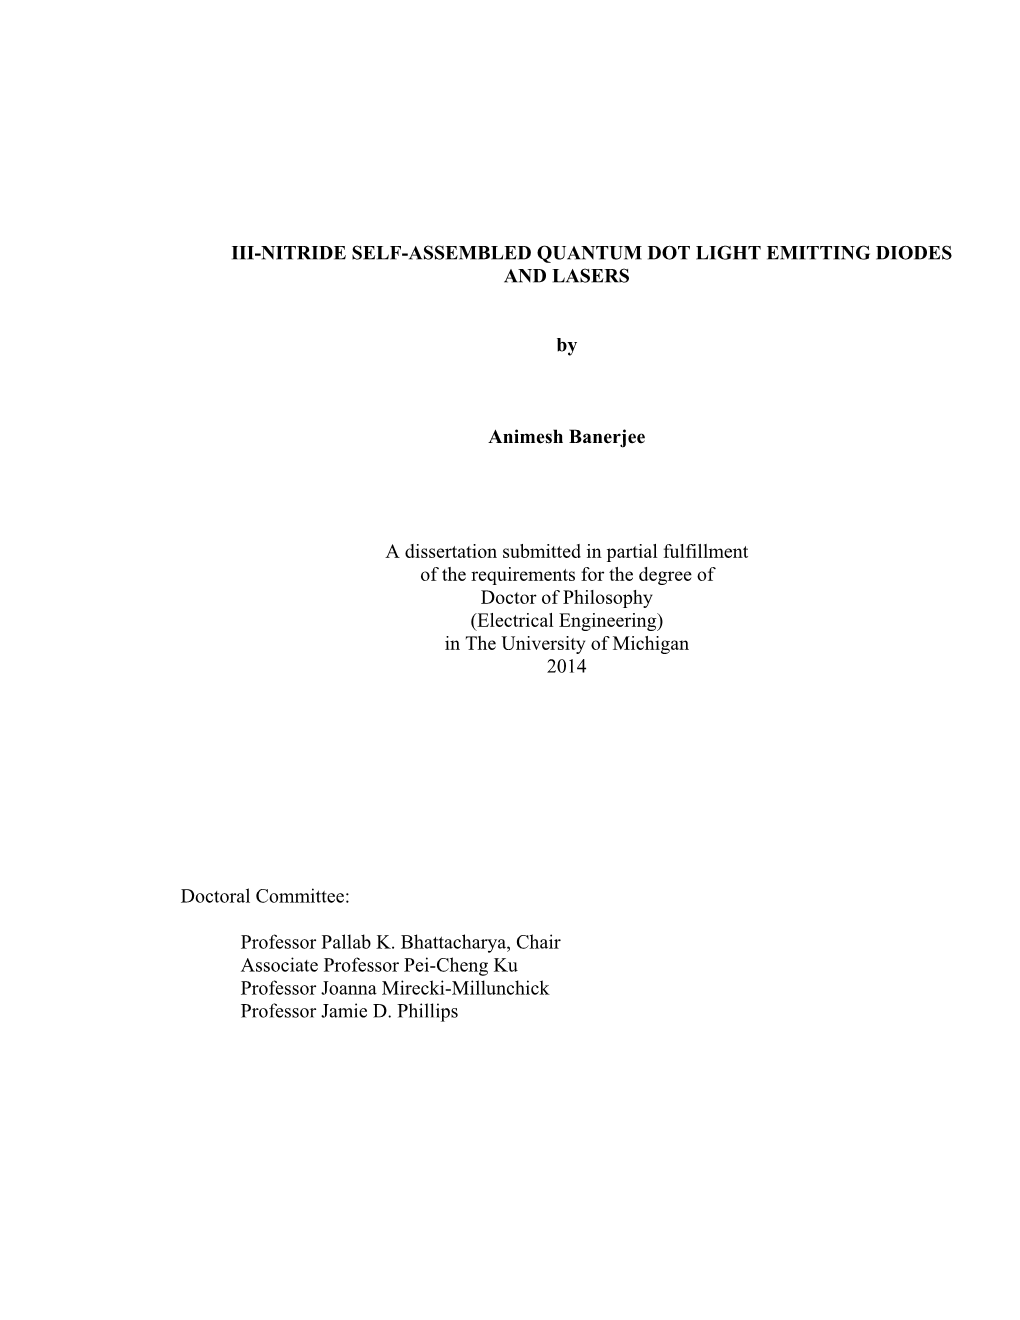 III-NITRIDE SELF-ASSEMBLED QUANTUM DOT LIGHT EMITTING DIODES and LASERS by Animesh Banerjee a Dissertation Submitted in Partial